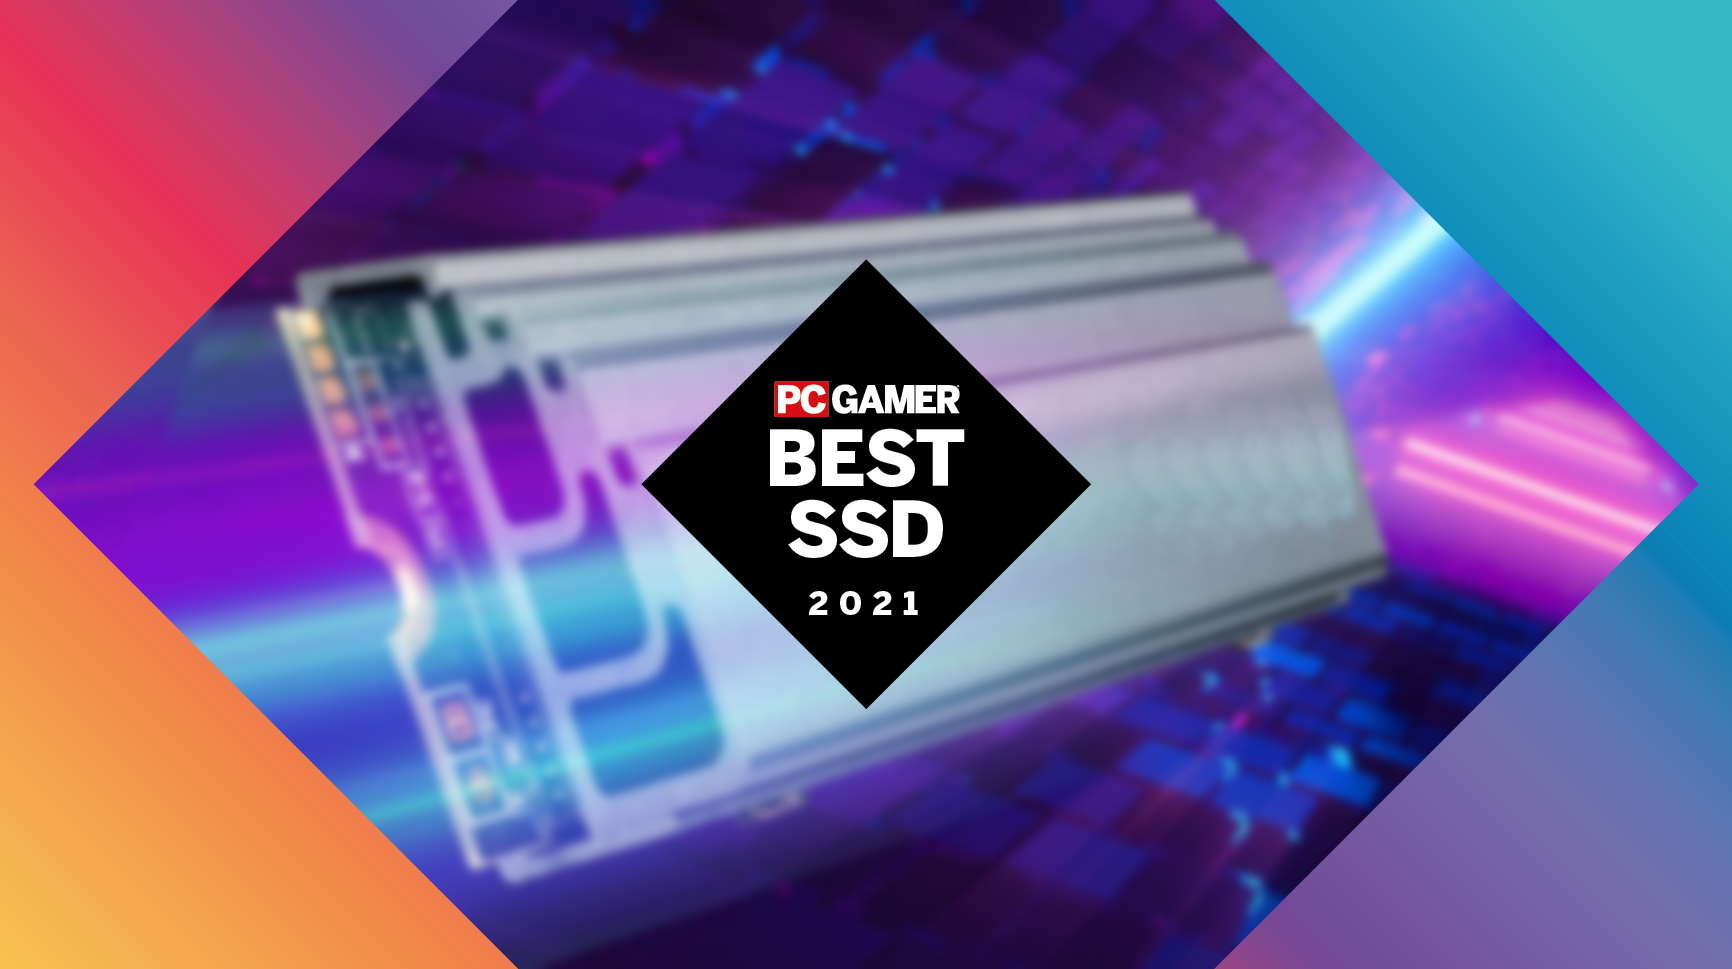 PC Gamer Hardware Awards: What Is The Best SSD Of 2021? thumbnail